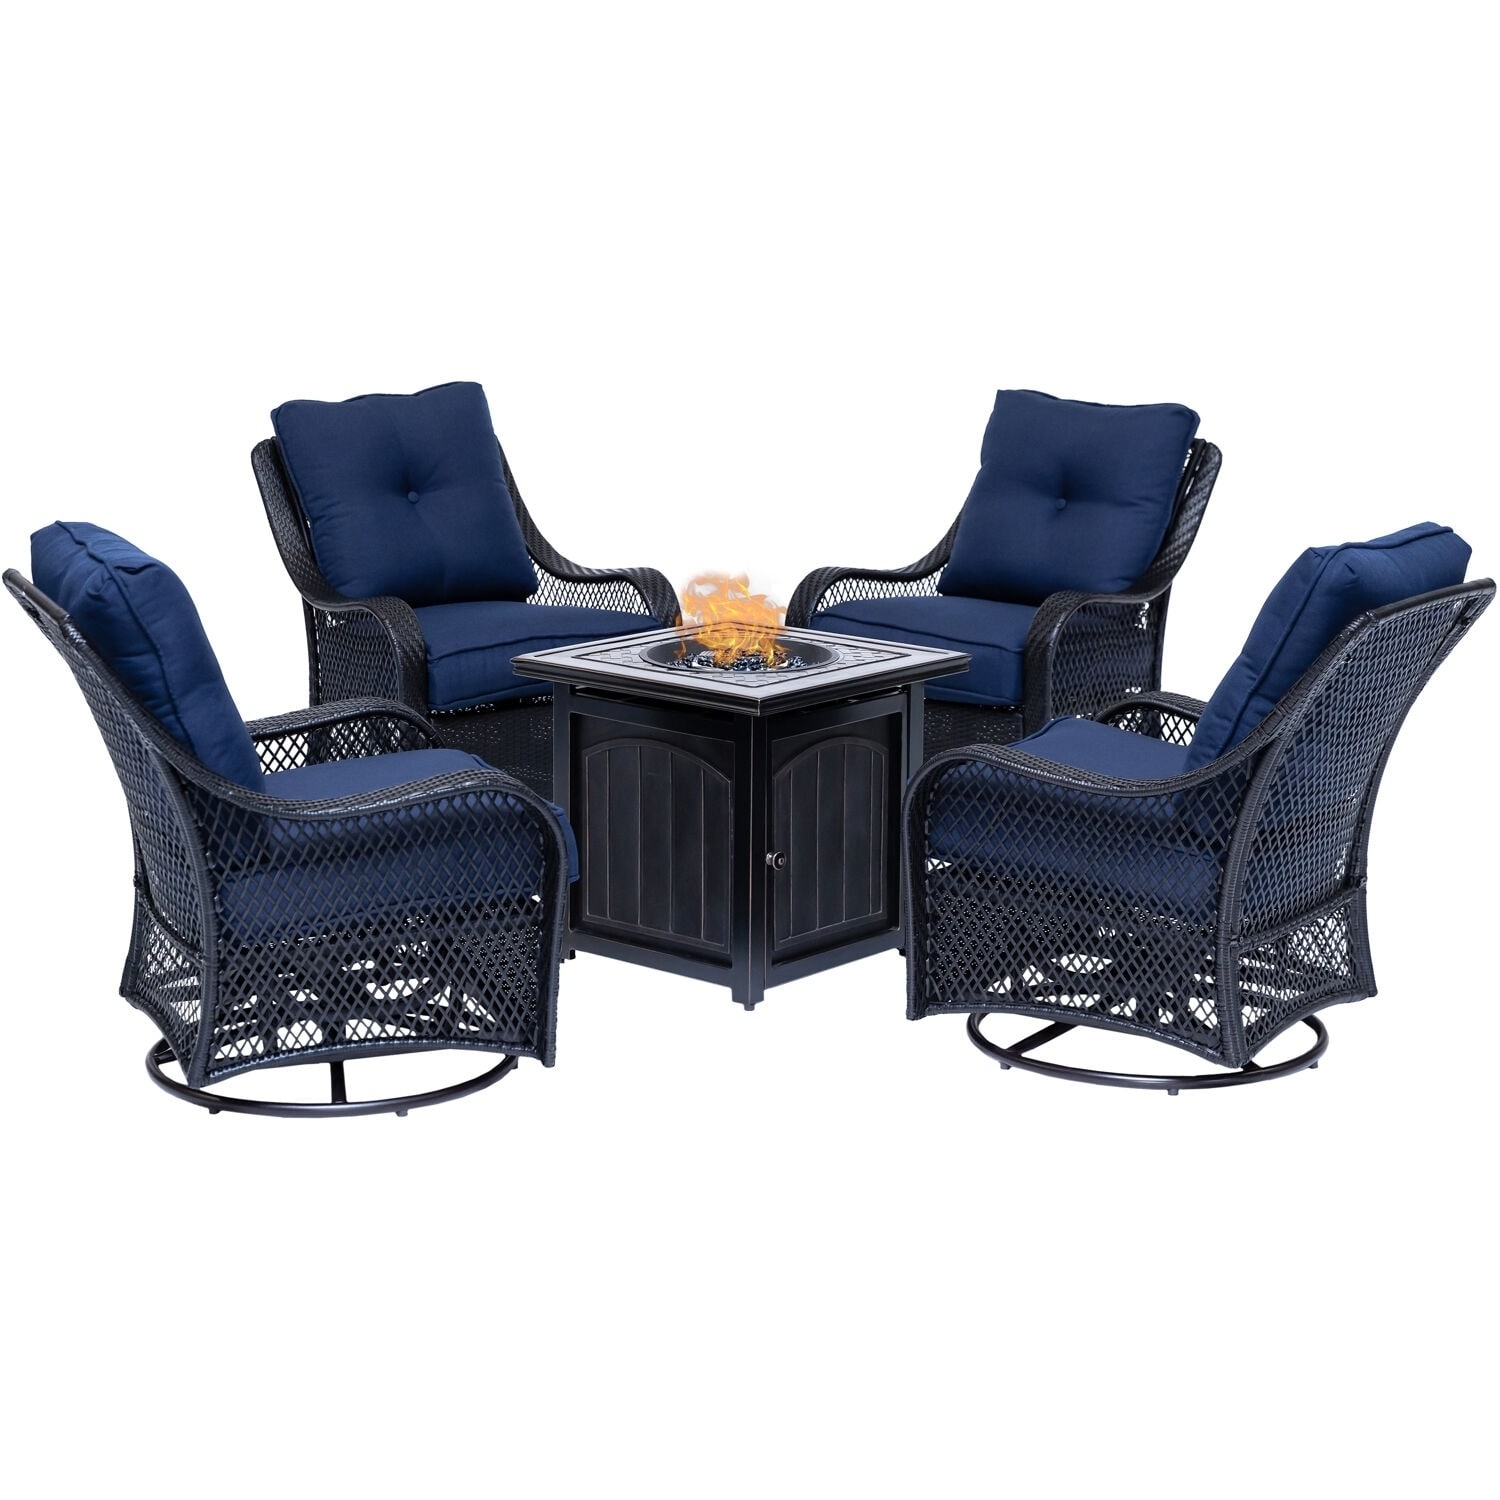 Hanover Orleans 5-piece Fire Pit Chat Set In Navy Blue With 4 Woven Swivel Gliders And A 26-in. Square Fire Pit Table